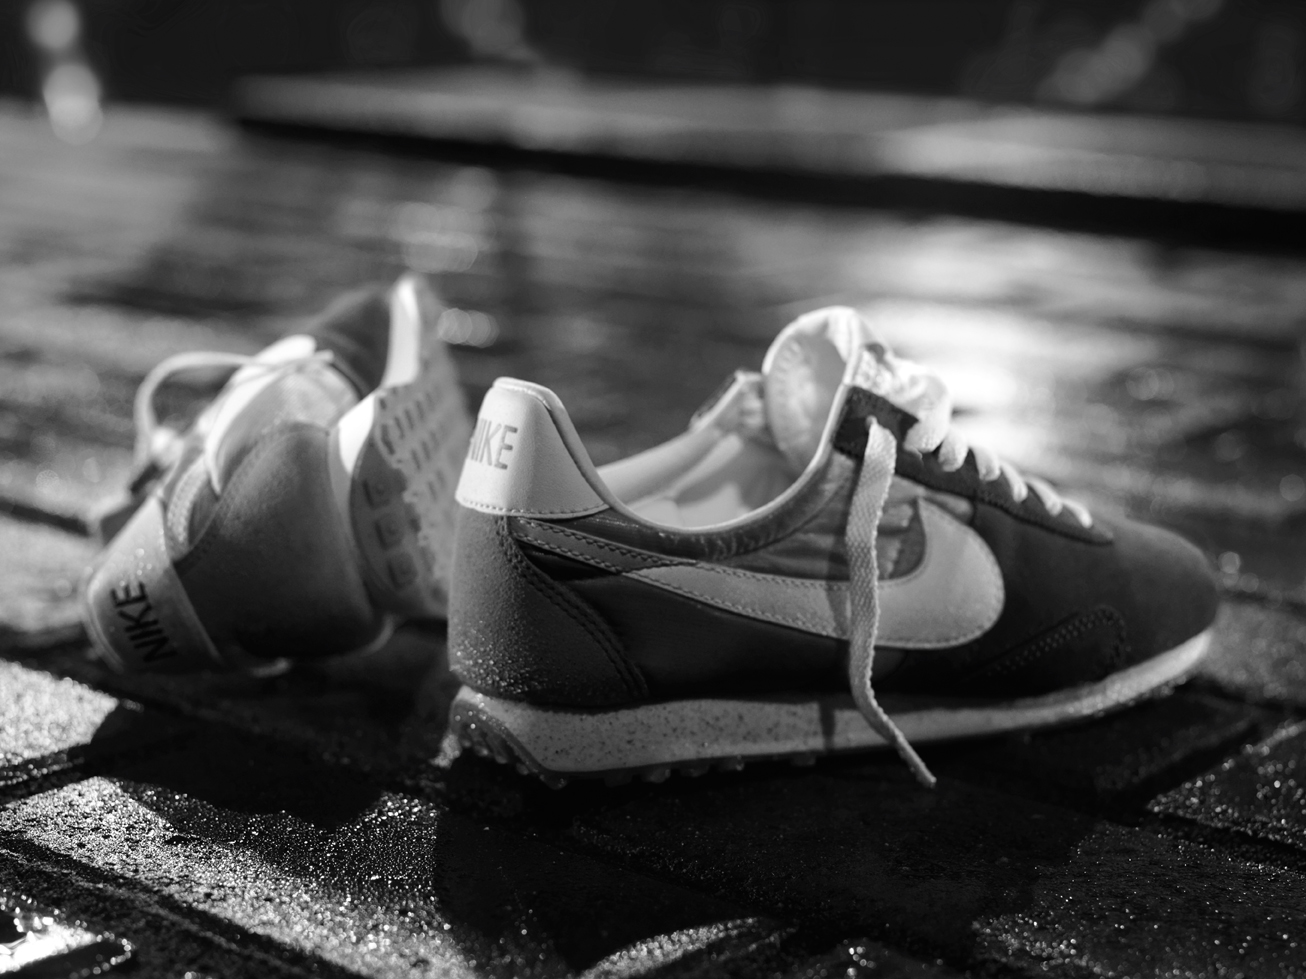 Studio 3 show photography vintage Nike sneakers